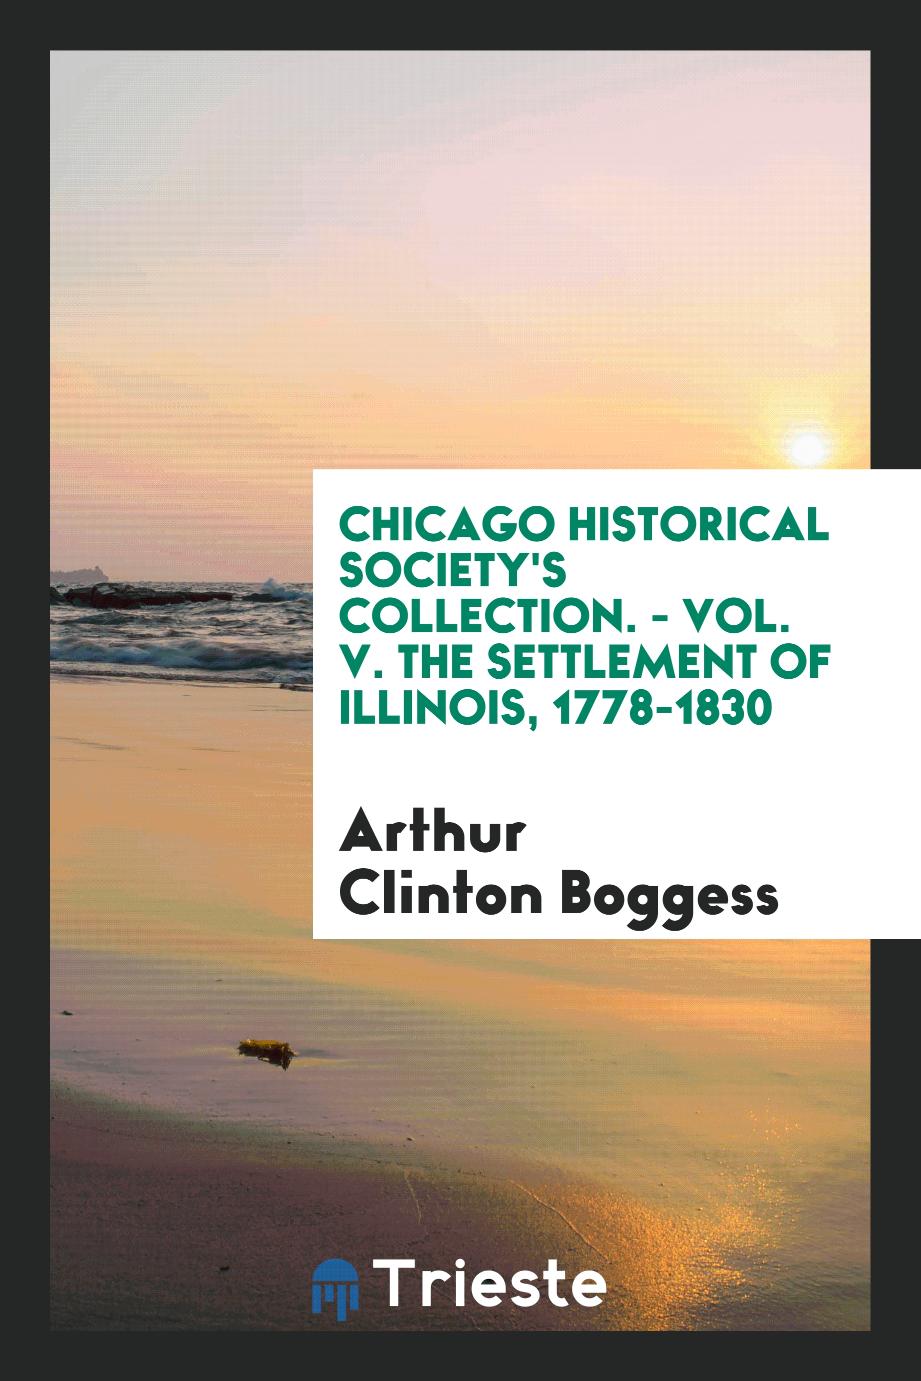 Chicago Historical Society's Collection. - Vol. V. The Settlement of Illinois, 1778-1830